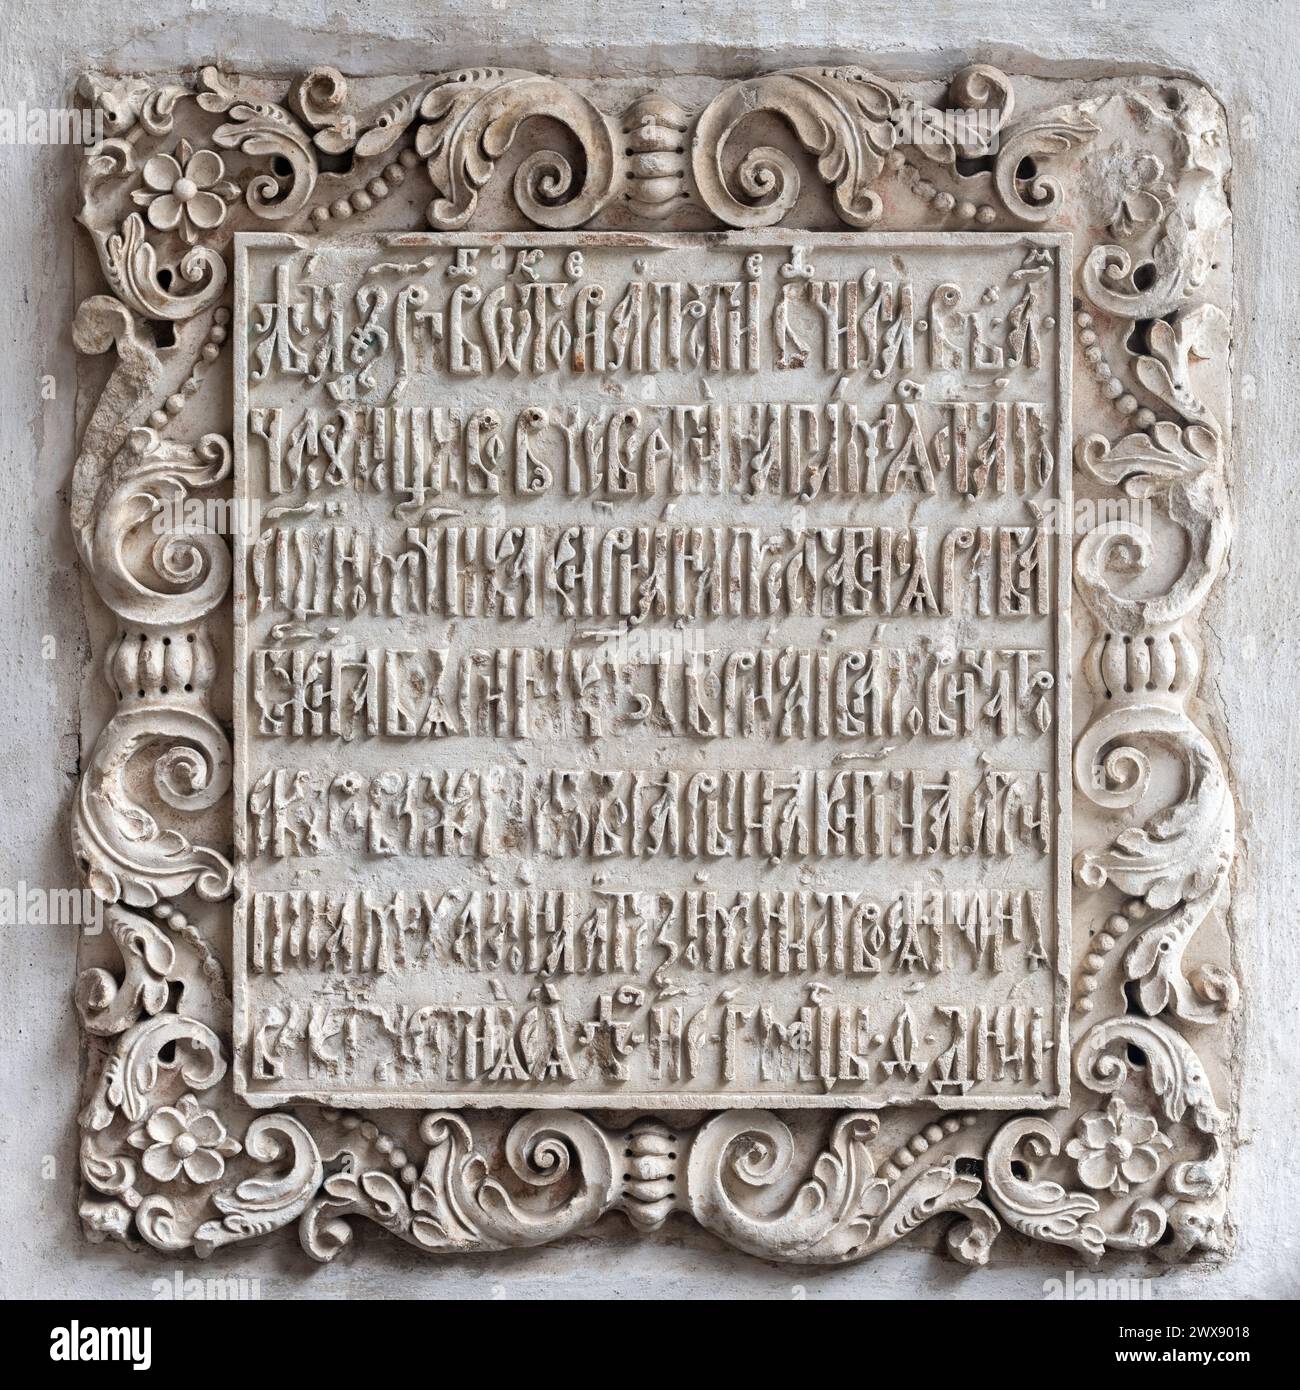 Stone tablet with Church Slavonic script, a medieval treasure from a Russian Orthodox church. Medieval Church Slavonic inscription, a gateway to the p Stock Photo